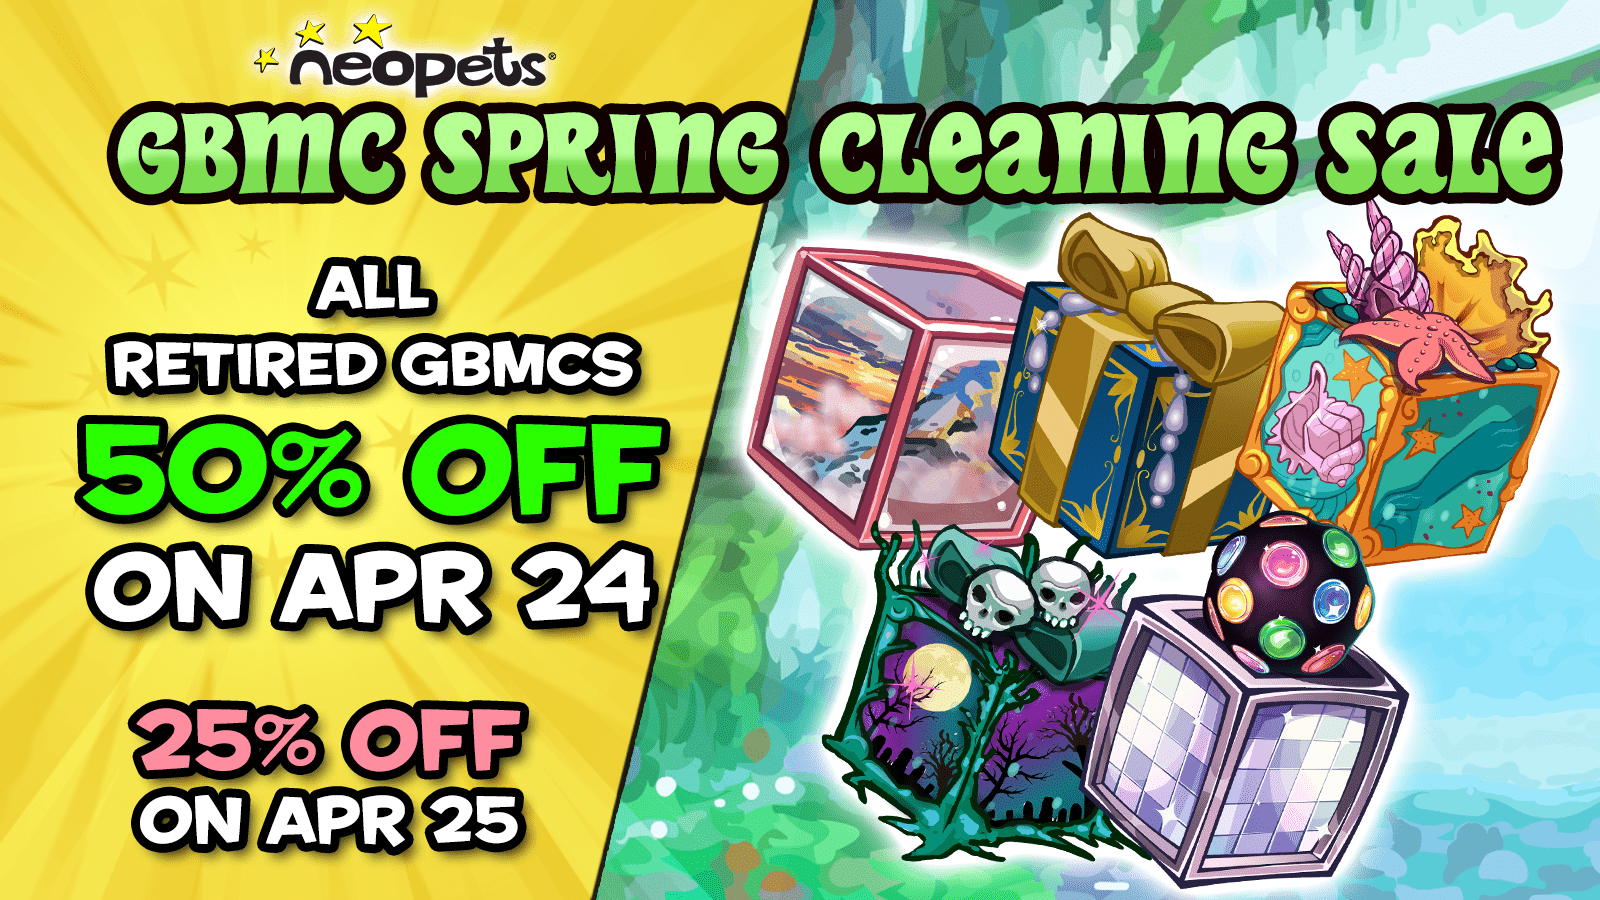 https://images.neopets.com/homepage/marquee/lincb_spring_cleaning_gbmc.png